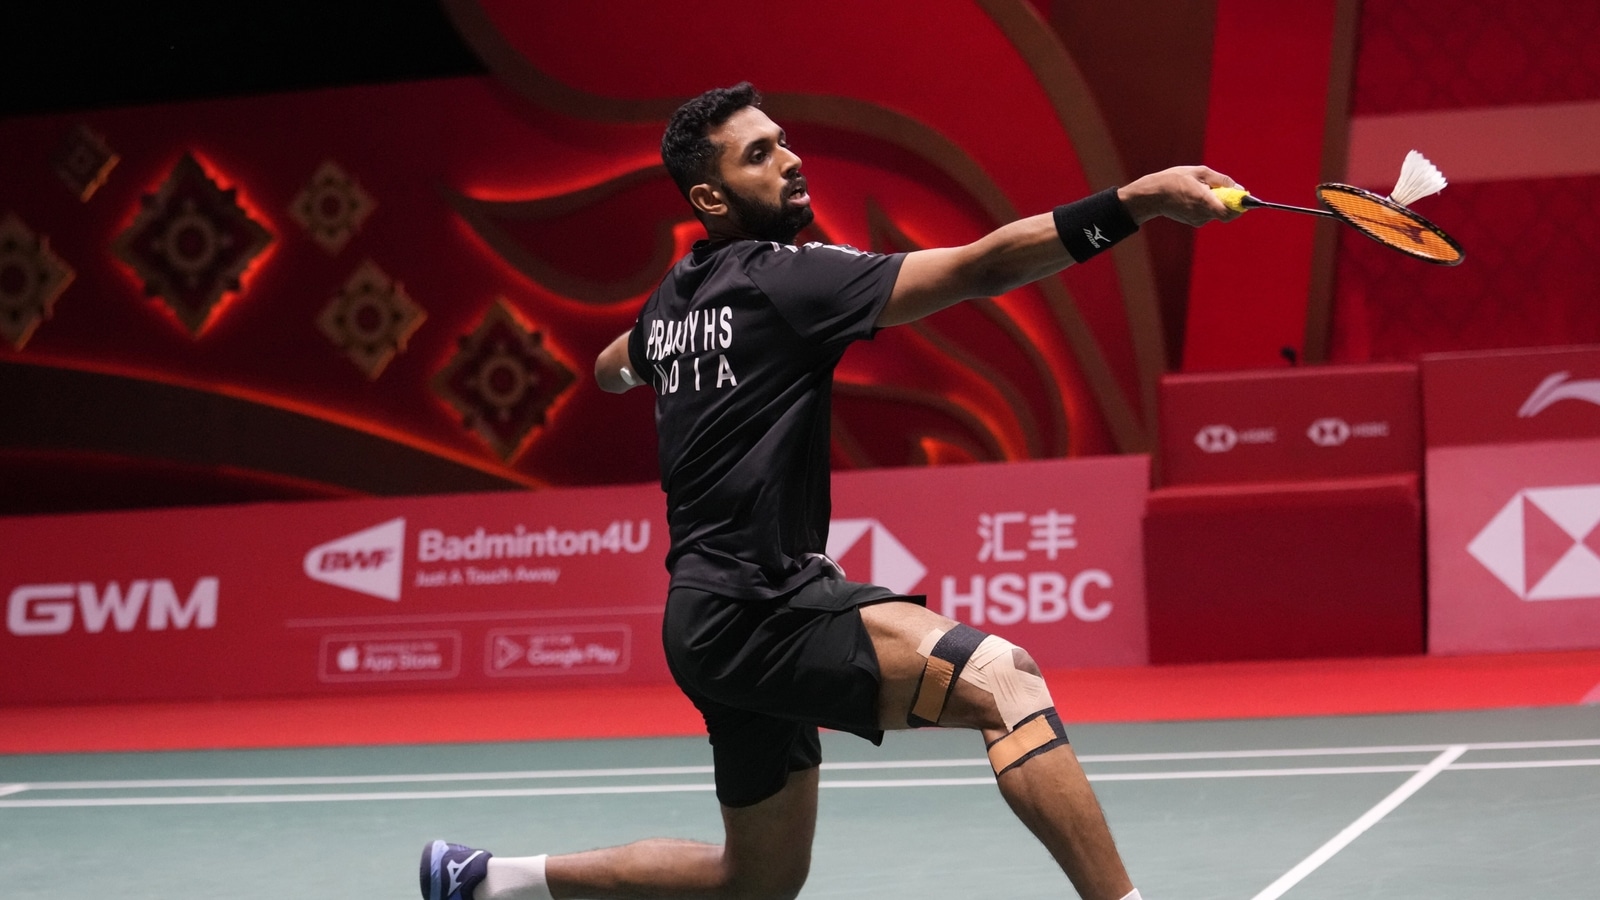 HS Prannoy loses to Lu Guang Zu in BWF World Tour Finals, out of semifinal race